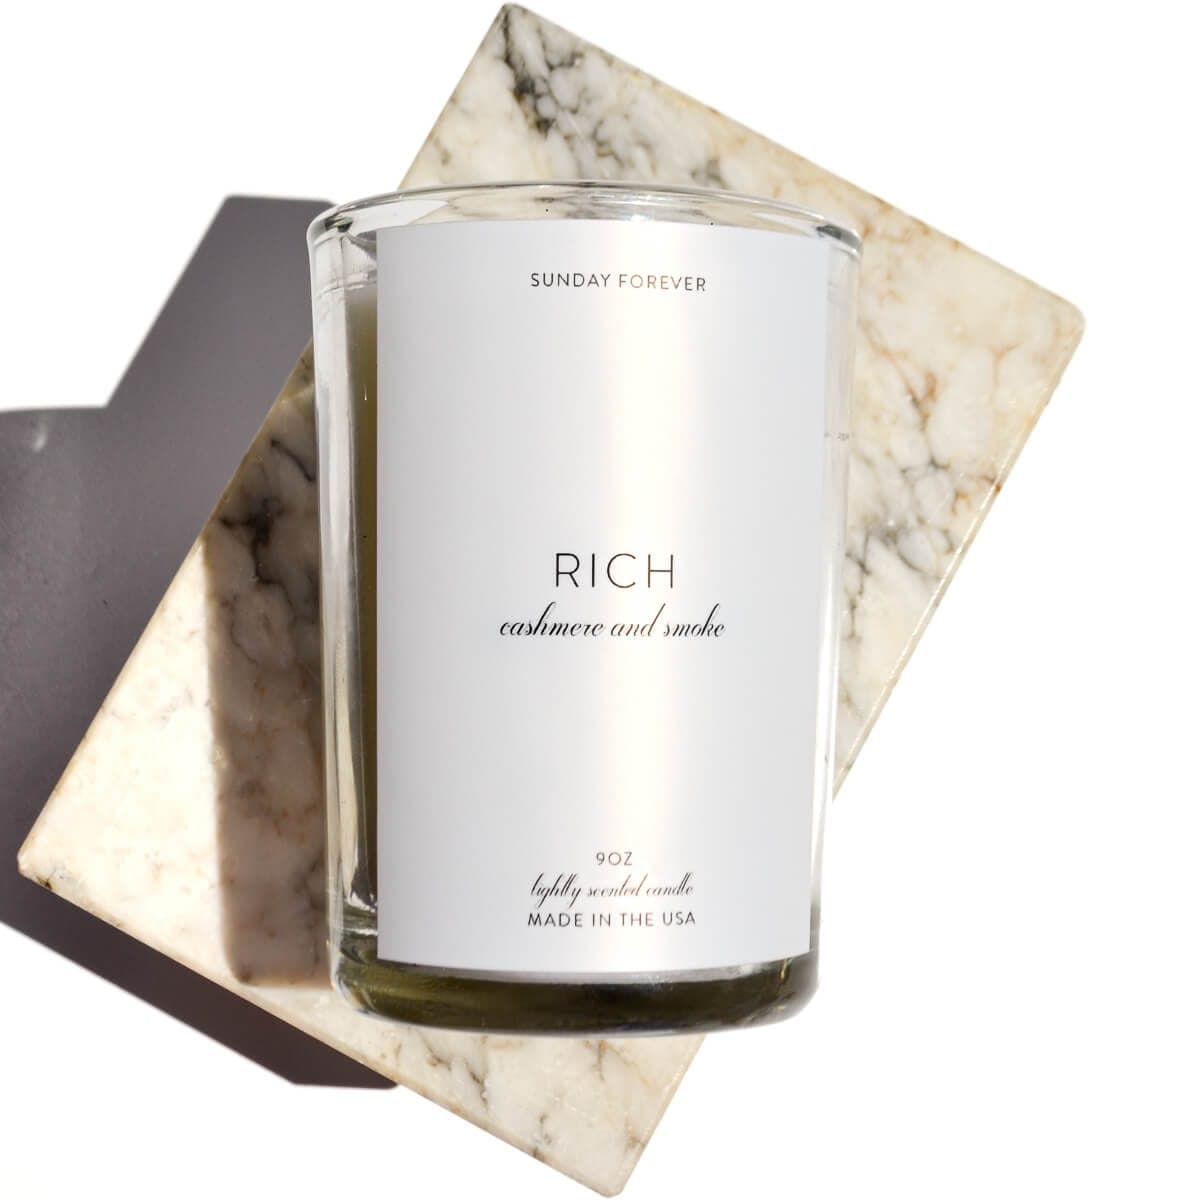 Rich Luxury Candle with Cashmere and Smoke - CANDLES-Sunday Forever